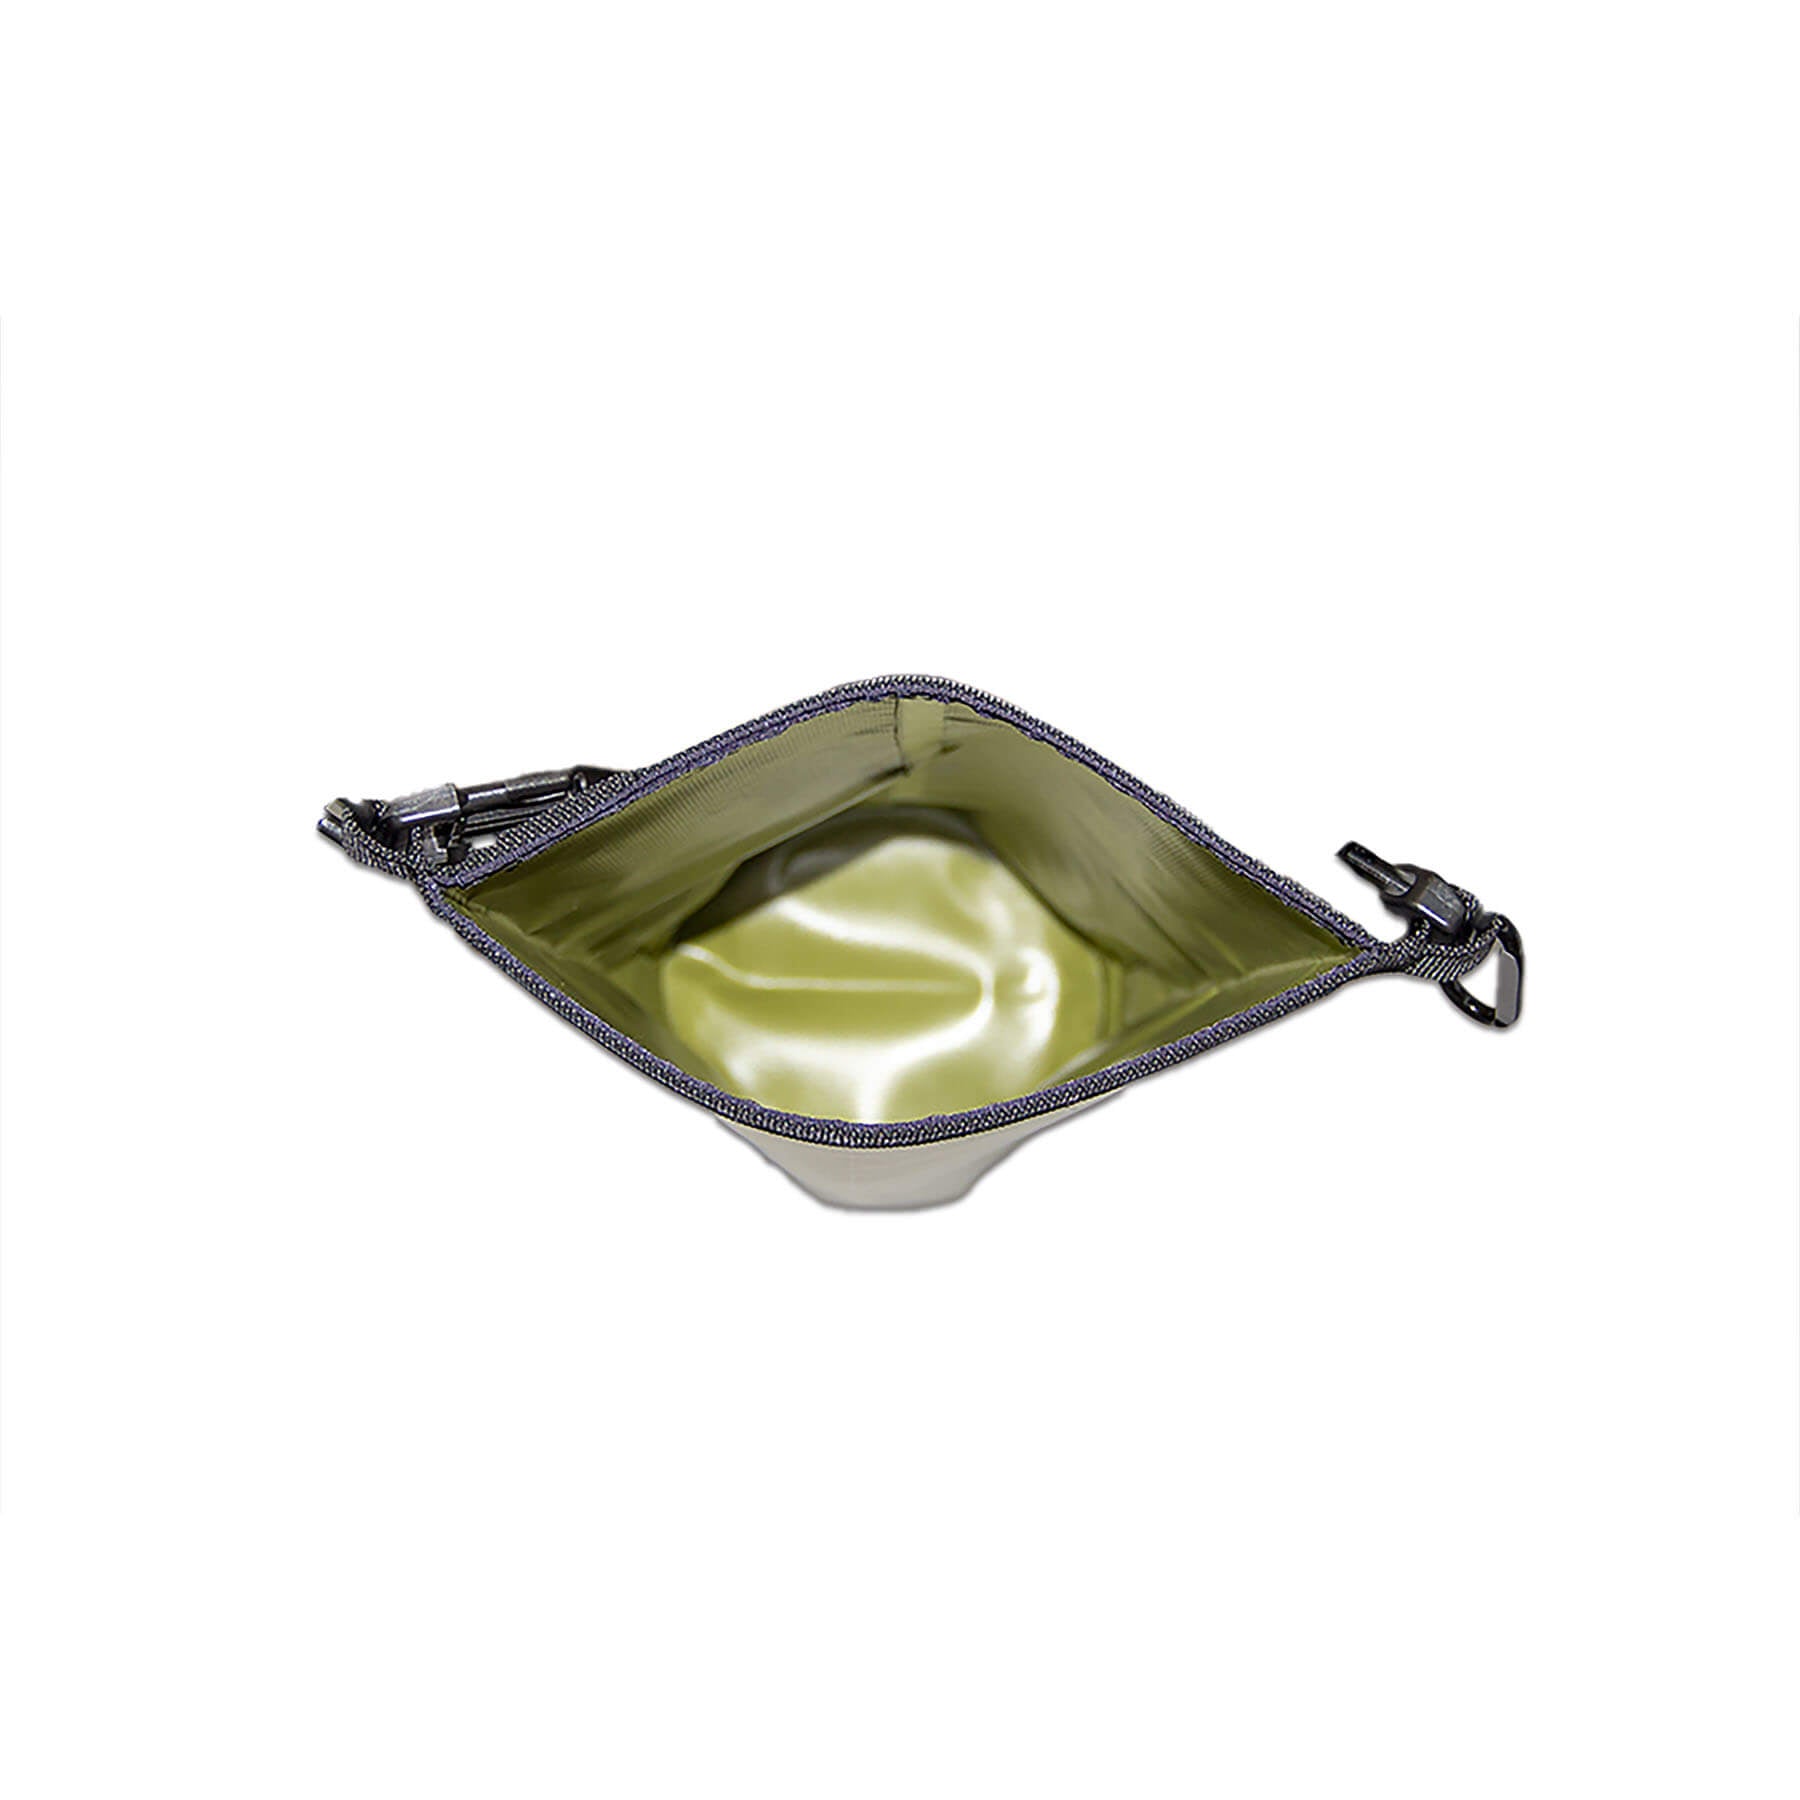 waterproof dry bag 5 litres a handy grab size with detachable straps and carabiner  in olive the inside view